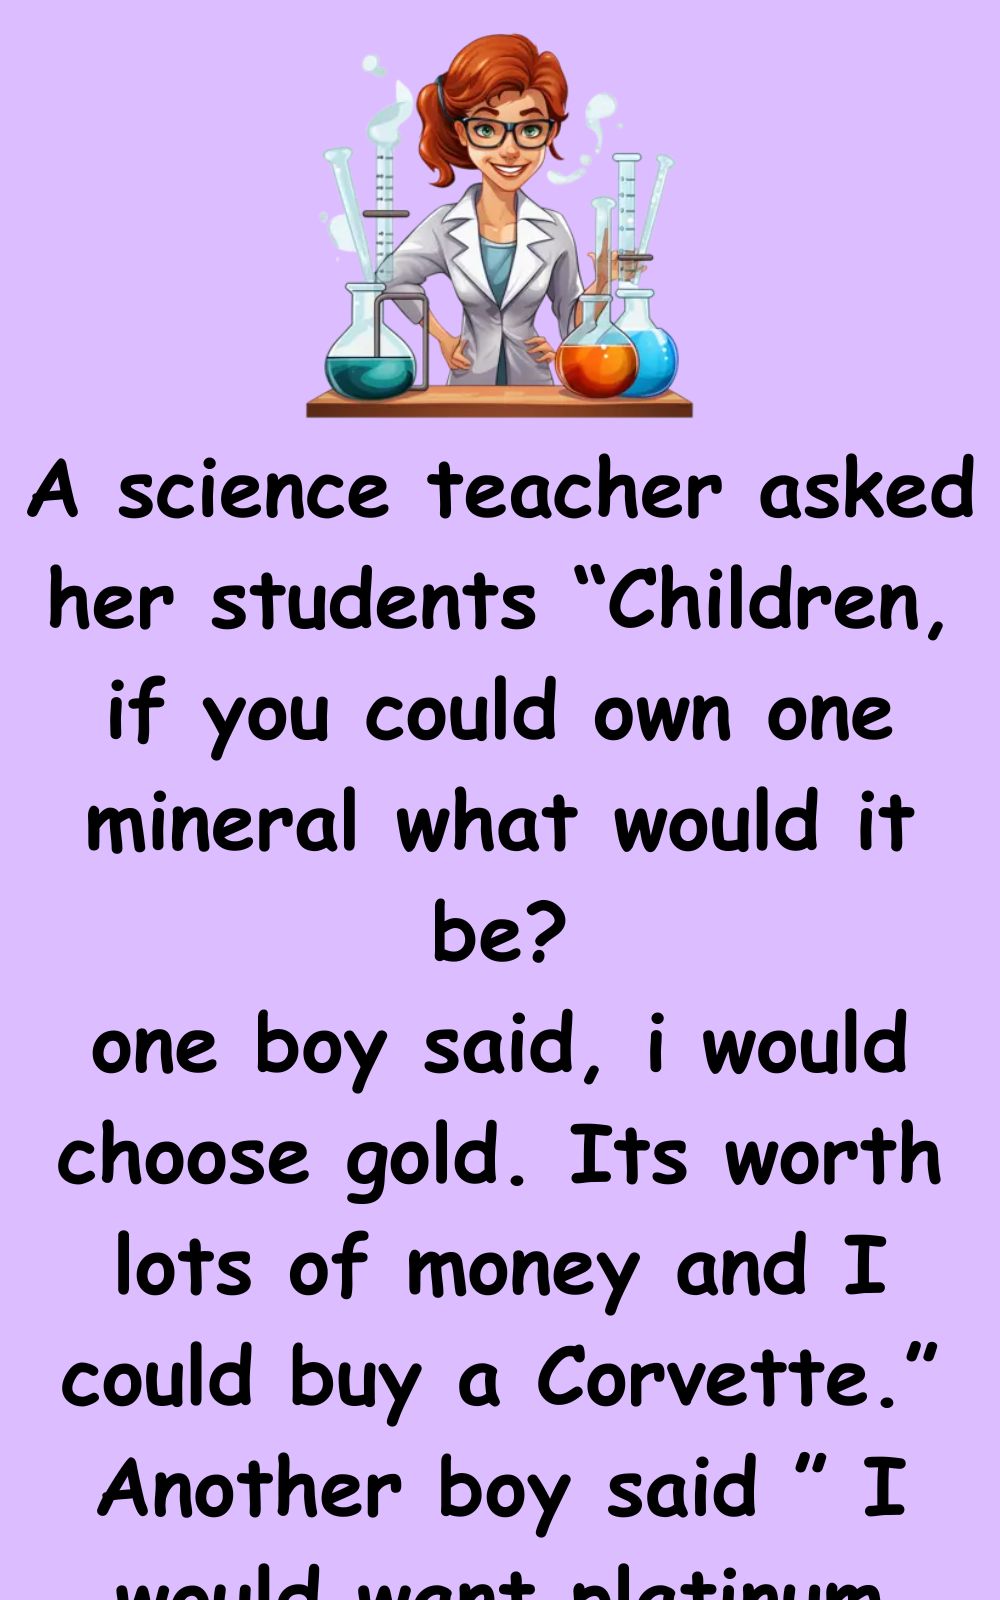 A science teacher asked her students